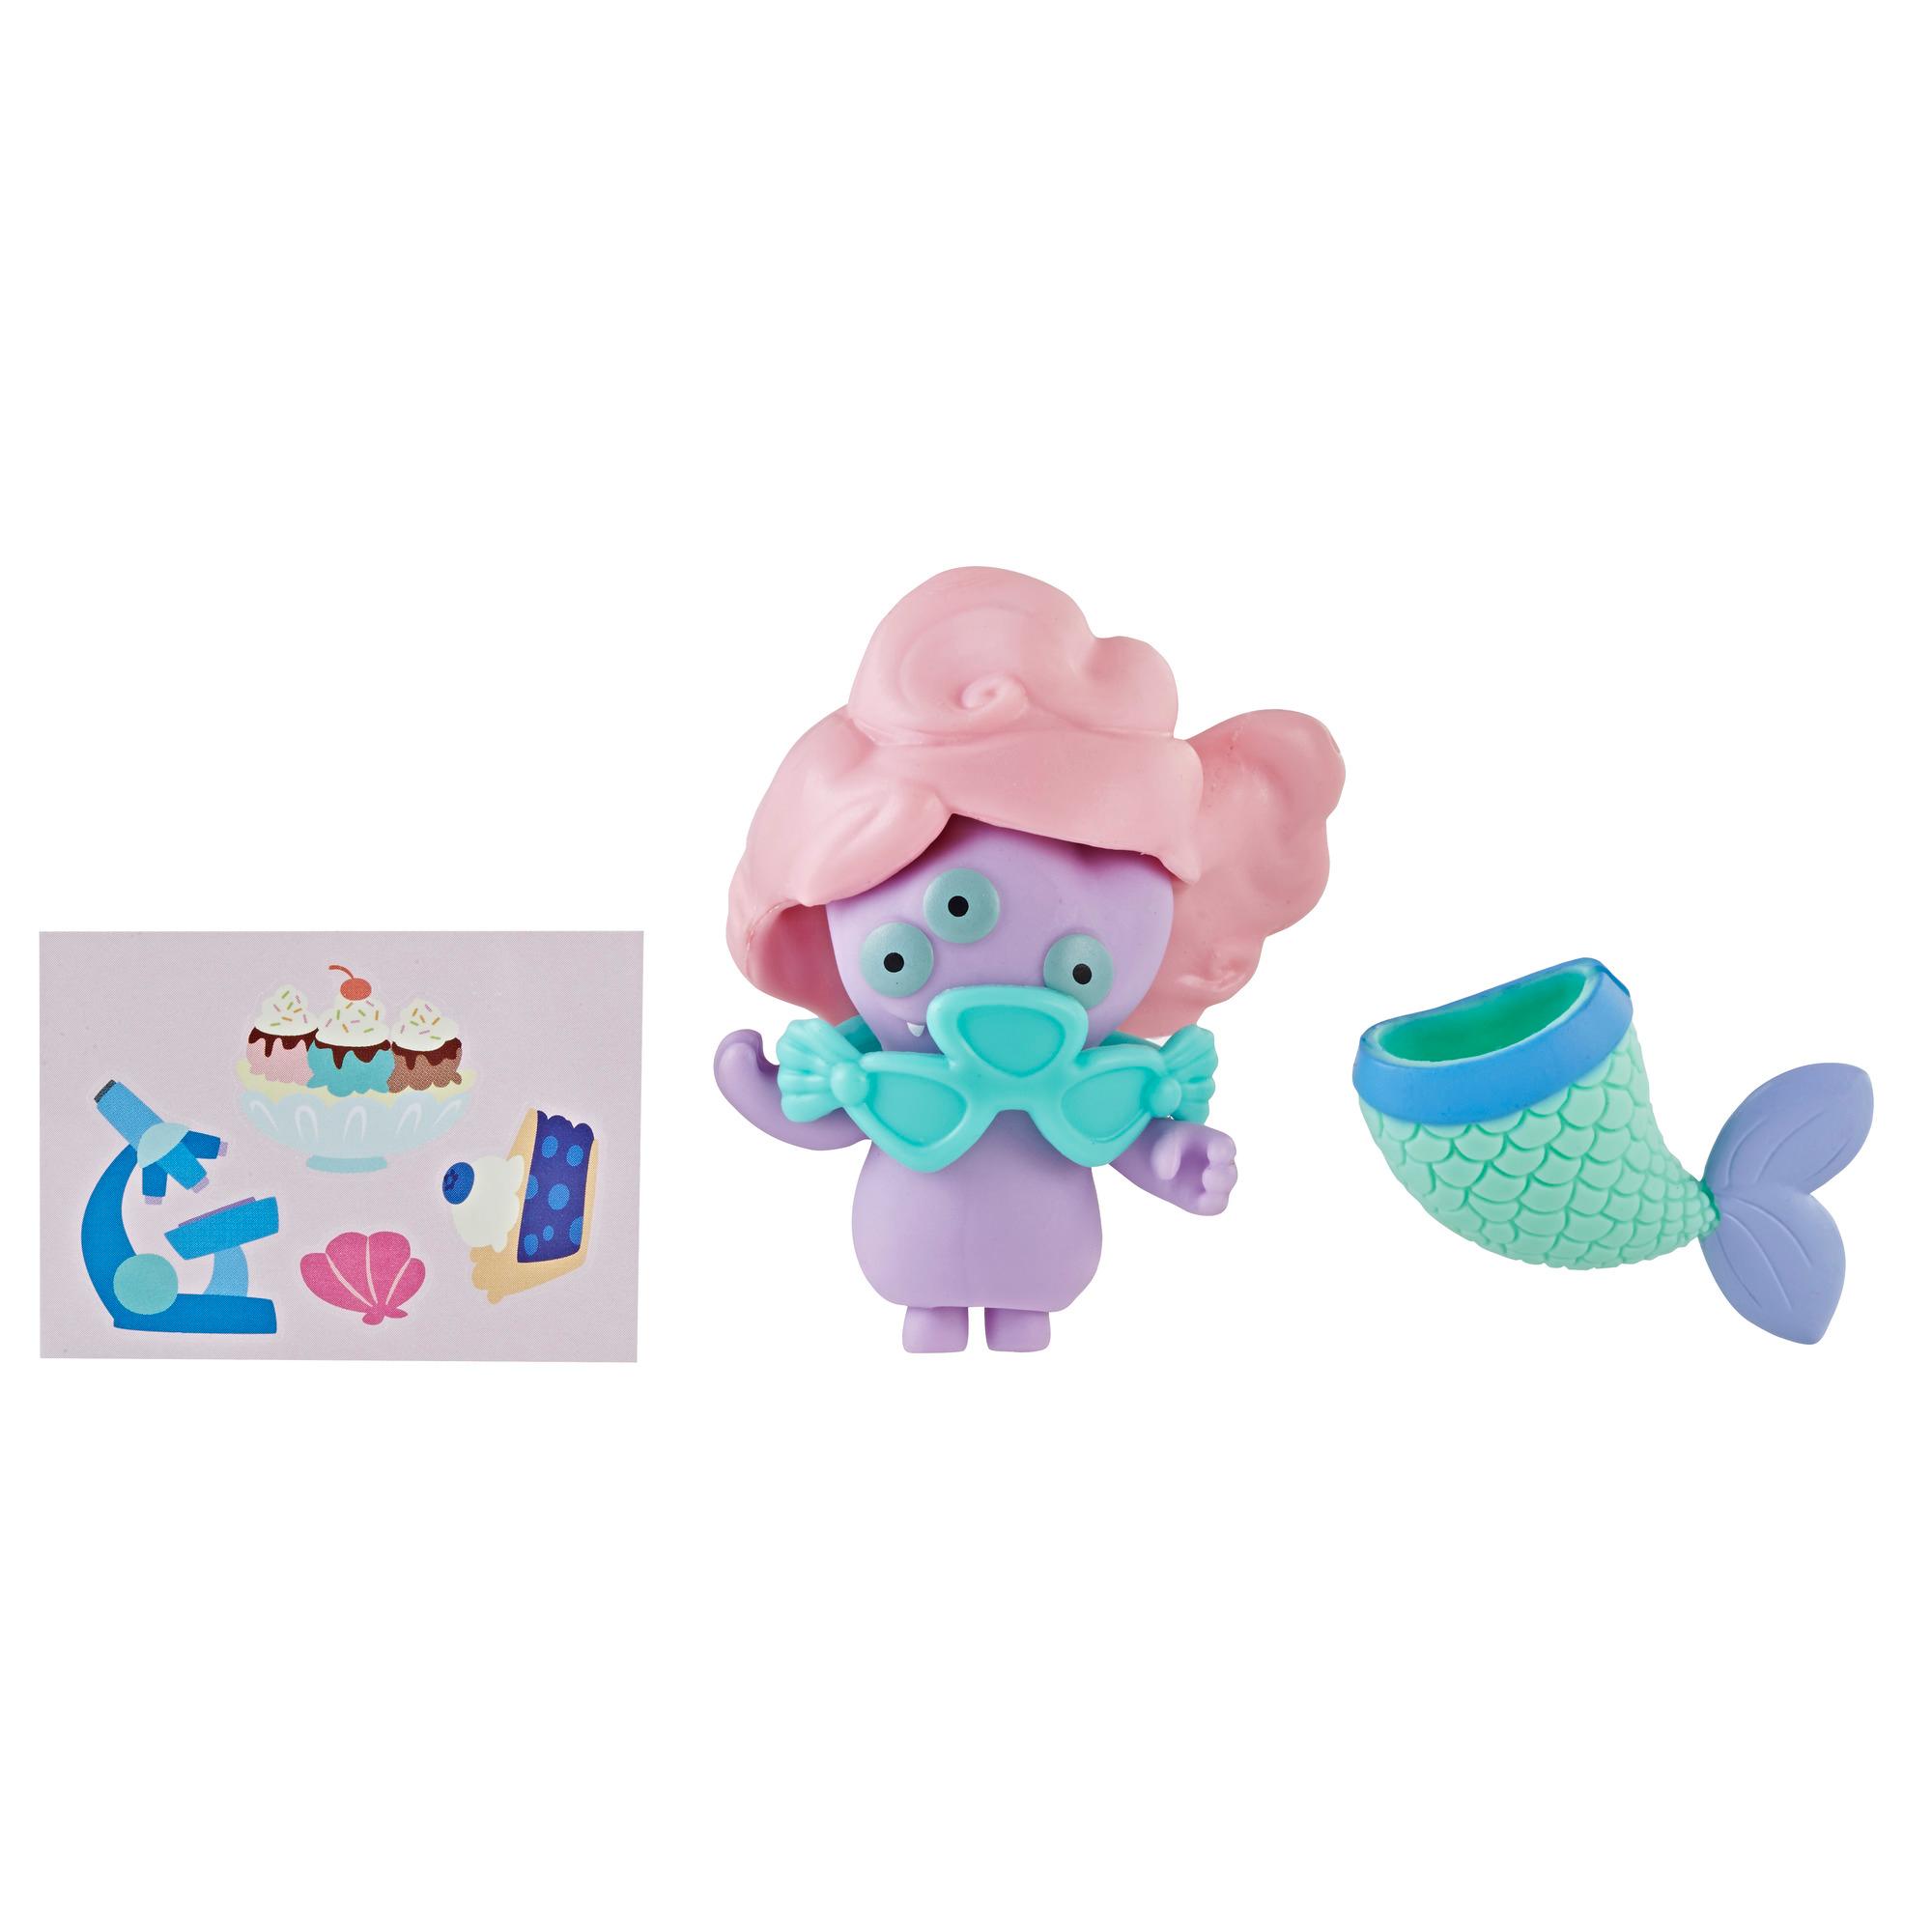 UglyDolls Surprise Disguise Mermaid Maiden Tray Toy, Figure and Accessories